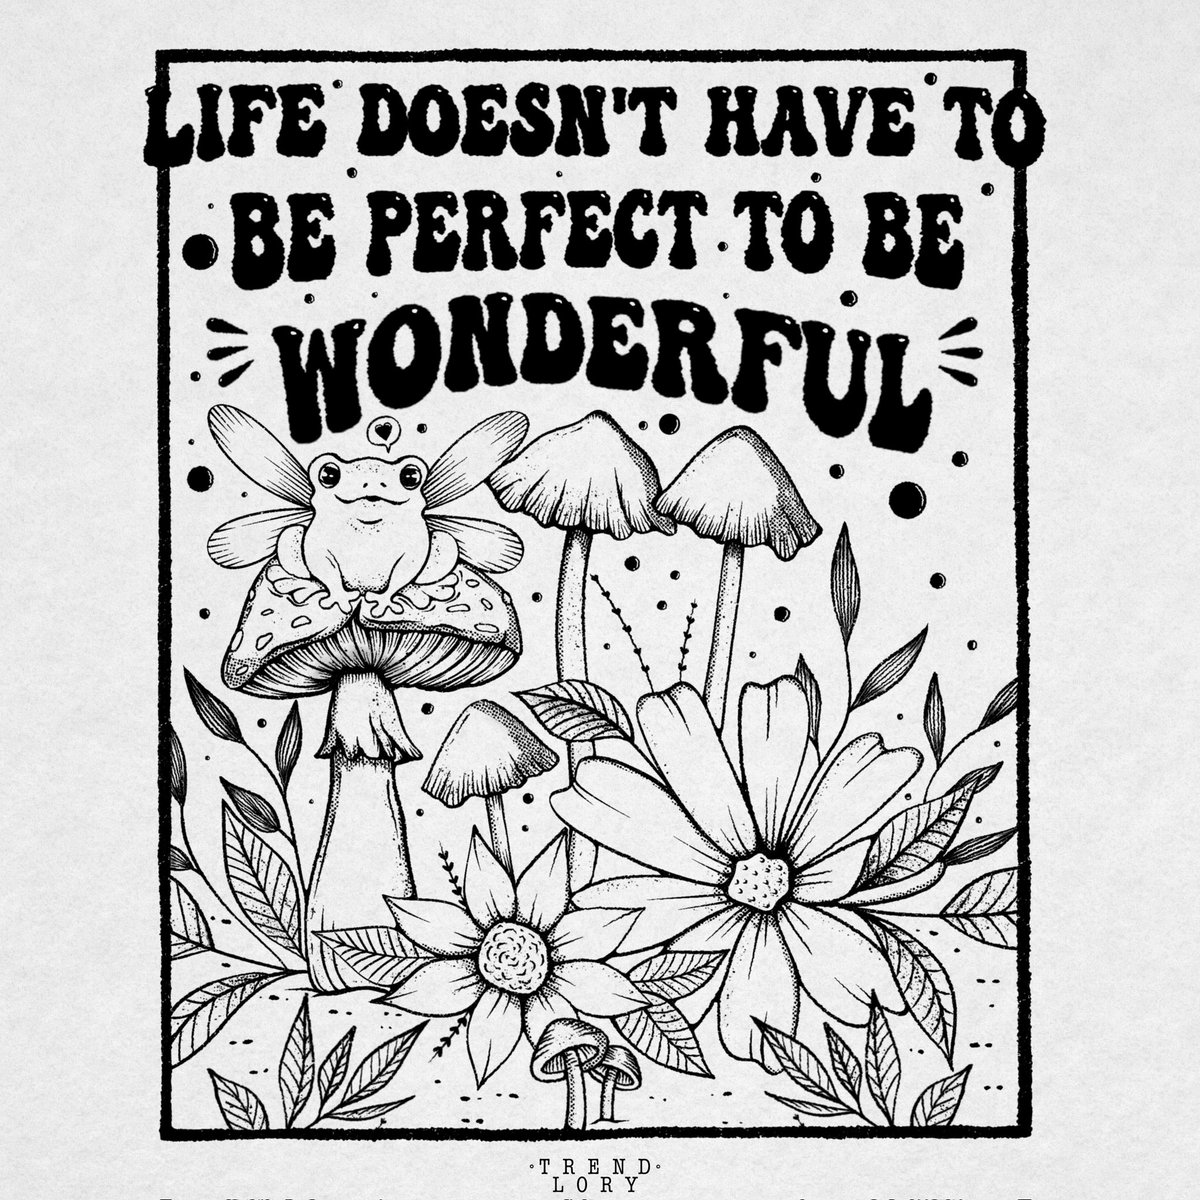 Life doesn't have to be perfect to be wonderful✨

Remember positivity is a choice.❤️🐸

Available now on my Threadless store. Check out the link to my shop in bio.

#mentalhealth #reminder #inspiration #quotesaboutlife #positive @threadless #artistshop